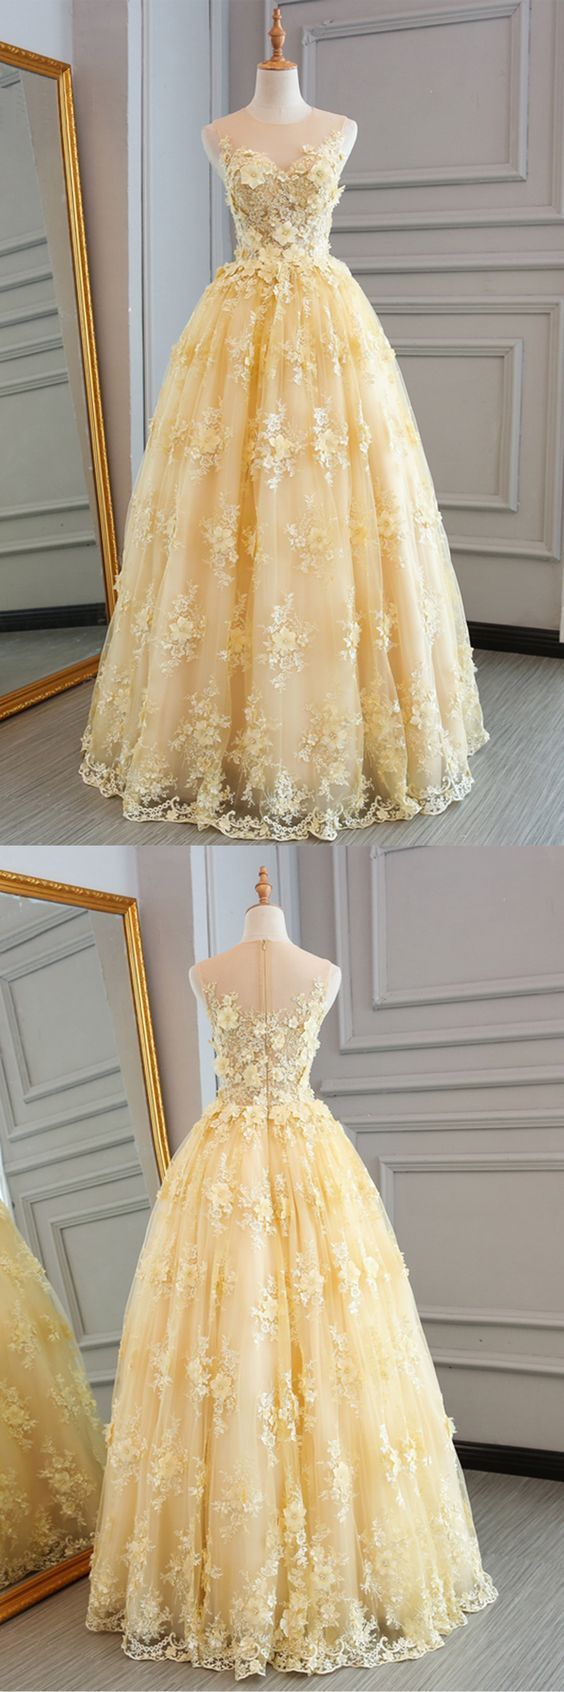 Yellow Tulle Lace Prom Dress, Ball Gown, Prom Dresses, Custom Made